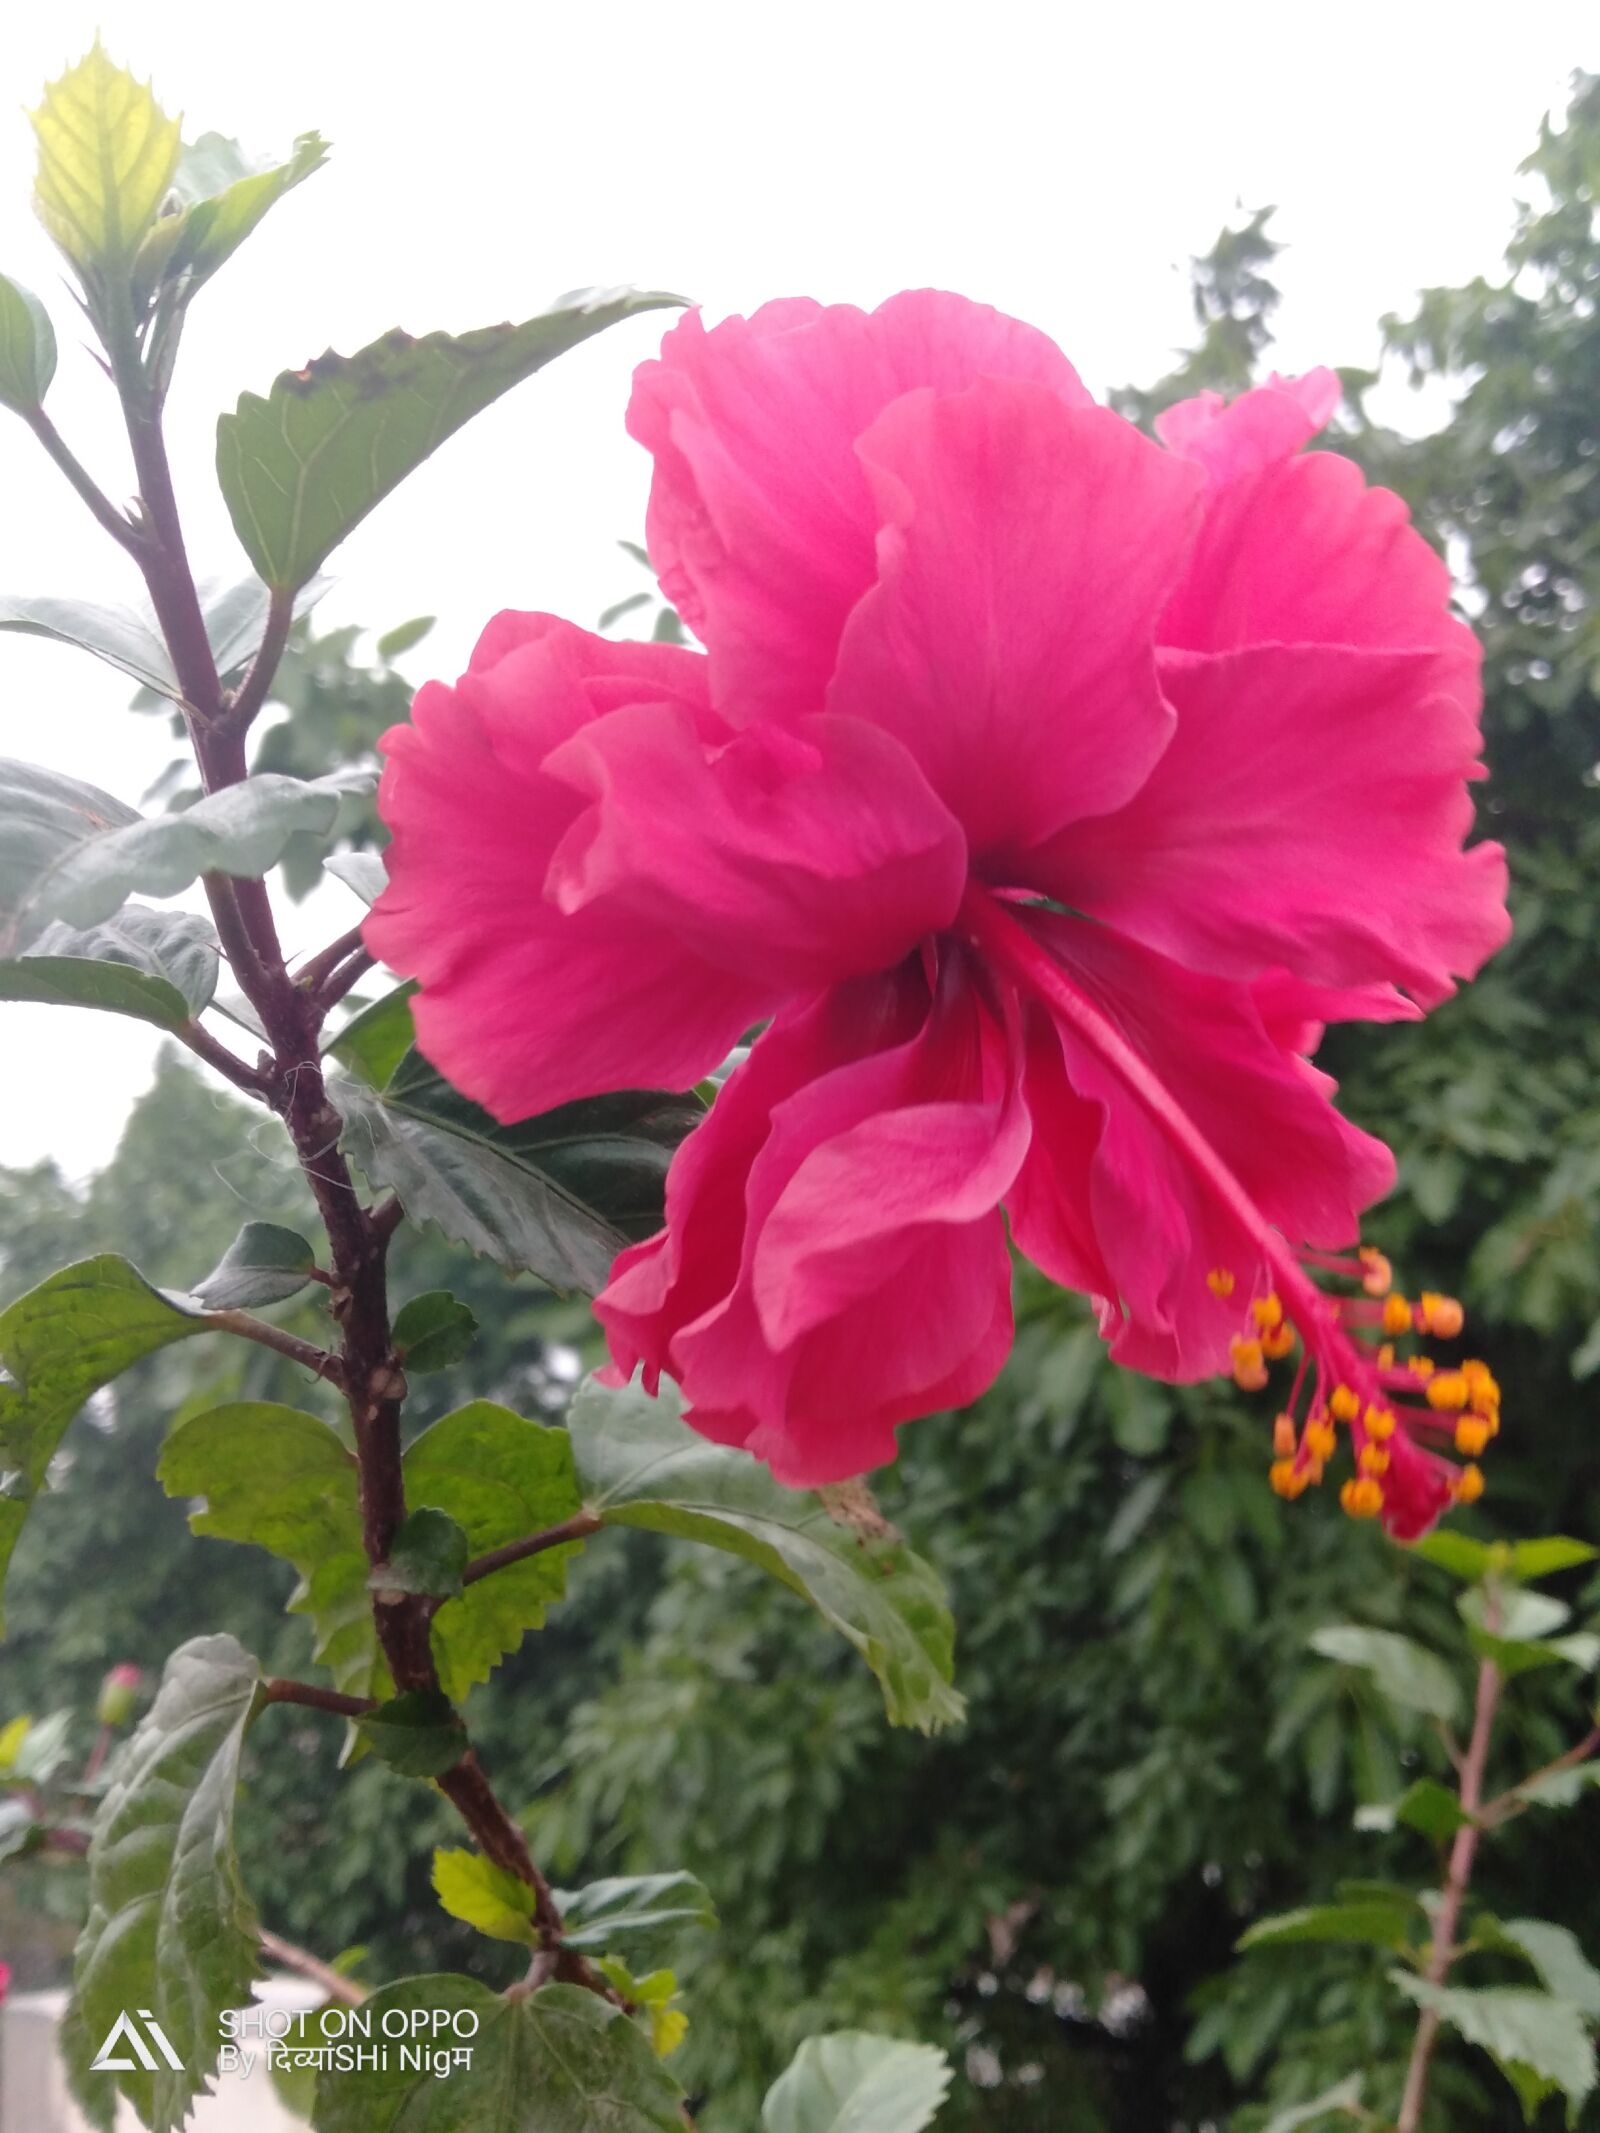 OPPO A7 sample photo. Hibiscus, flower, pink photography